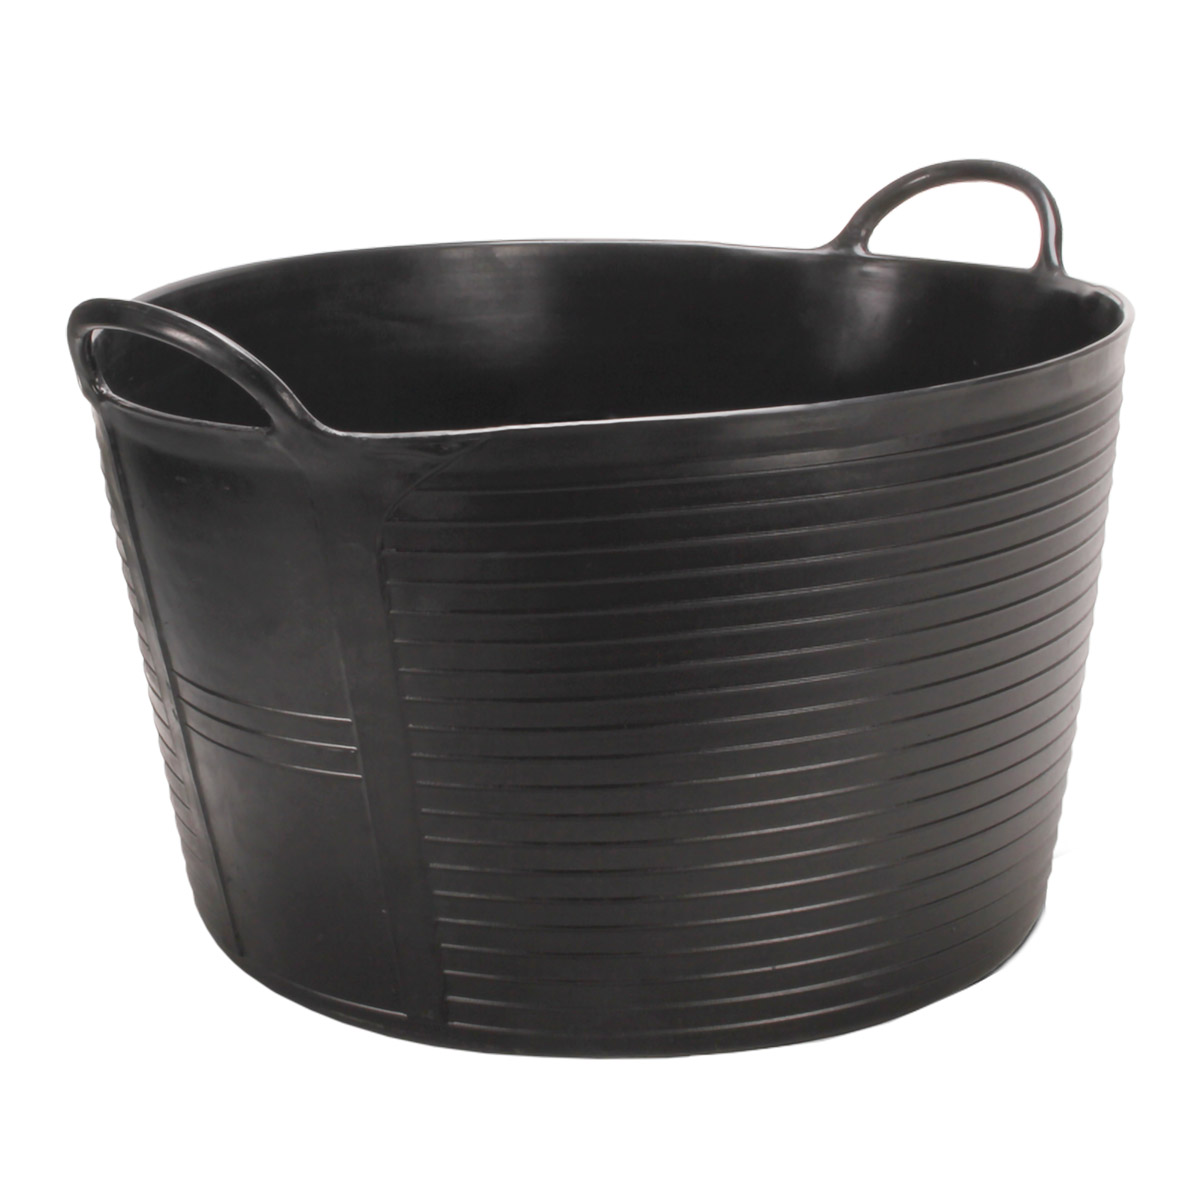 3 PACK BLACK RUBBER BUILDERS BUCKET 3 GALLON 14L 14 LITRES WITH METAL HANDLE 